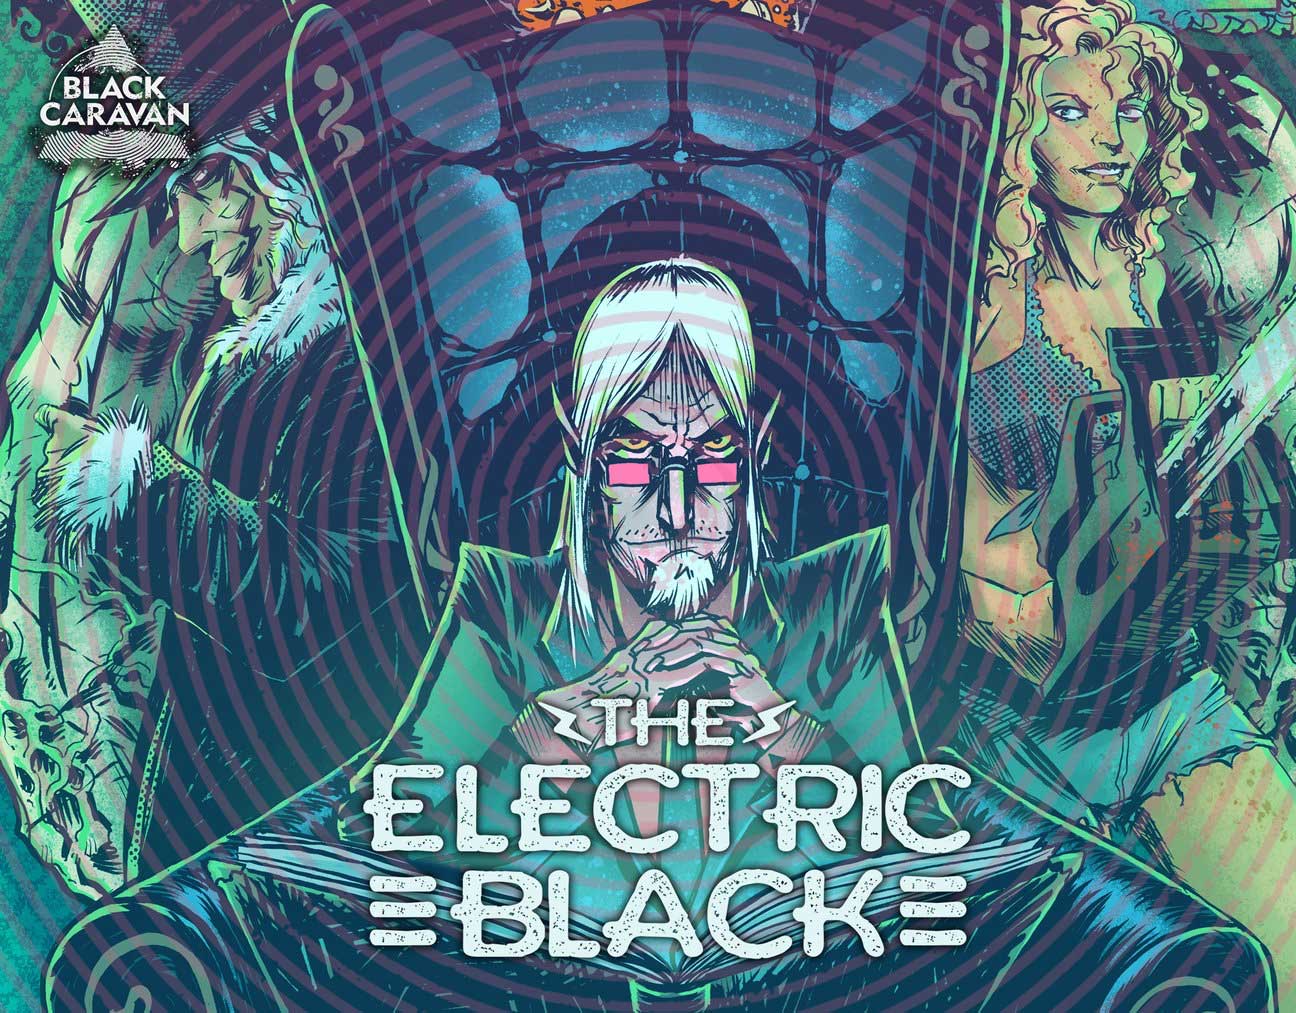 The Electric Black